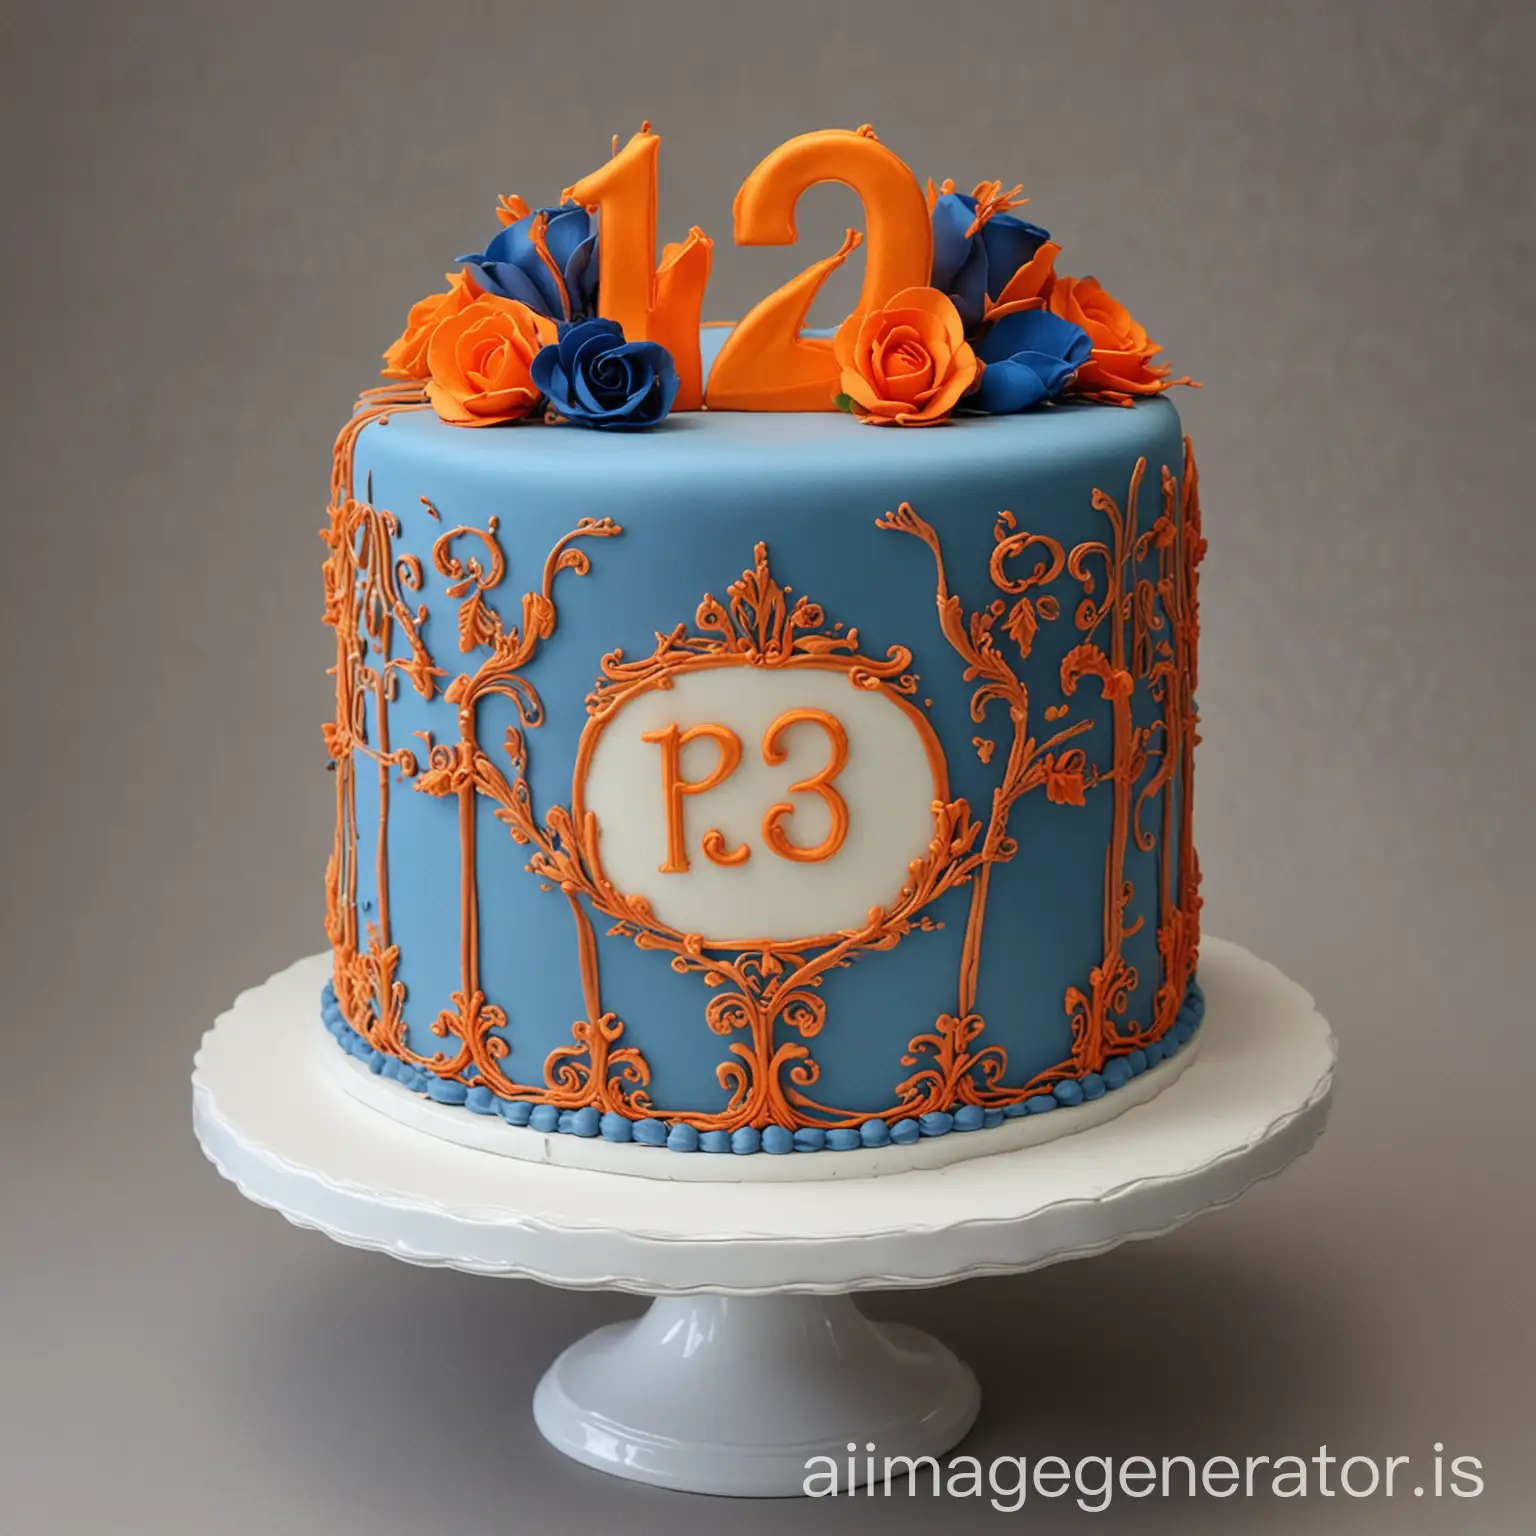 Elegantly-Decorated-122nd-Anniversary-Cake-for-PS-in-Blue-and-Orange